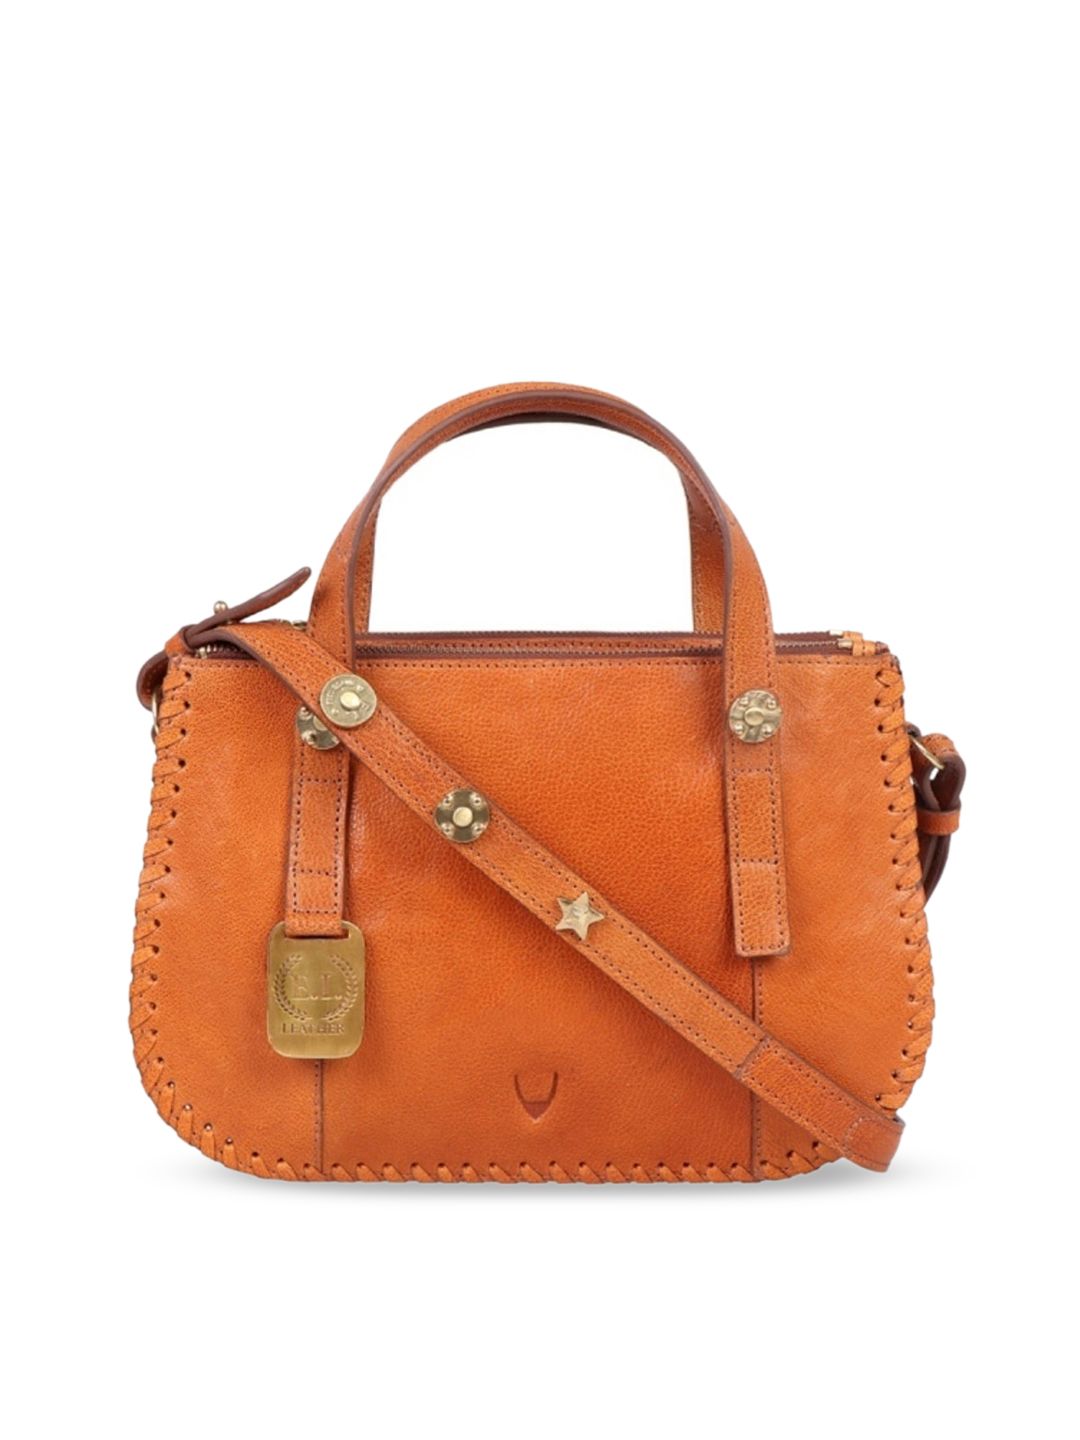 Hidesign Women Tan Leather Structured Handheld Bag Price in India